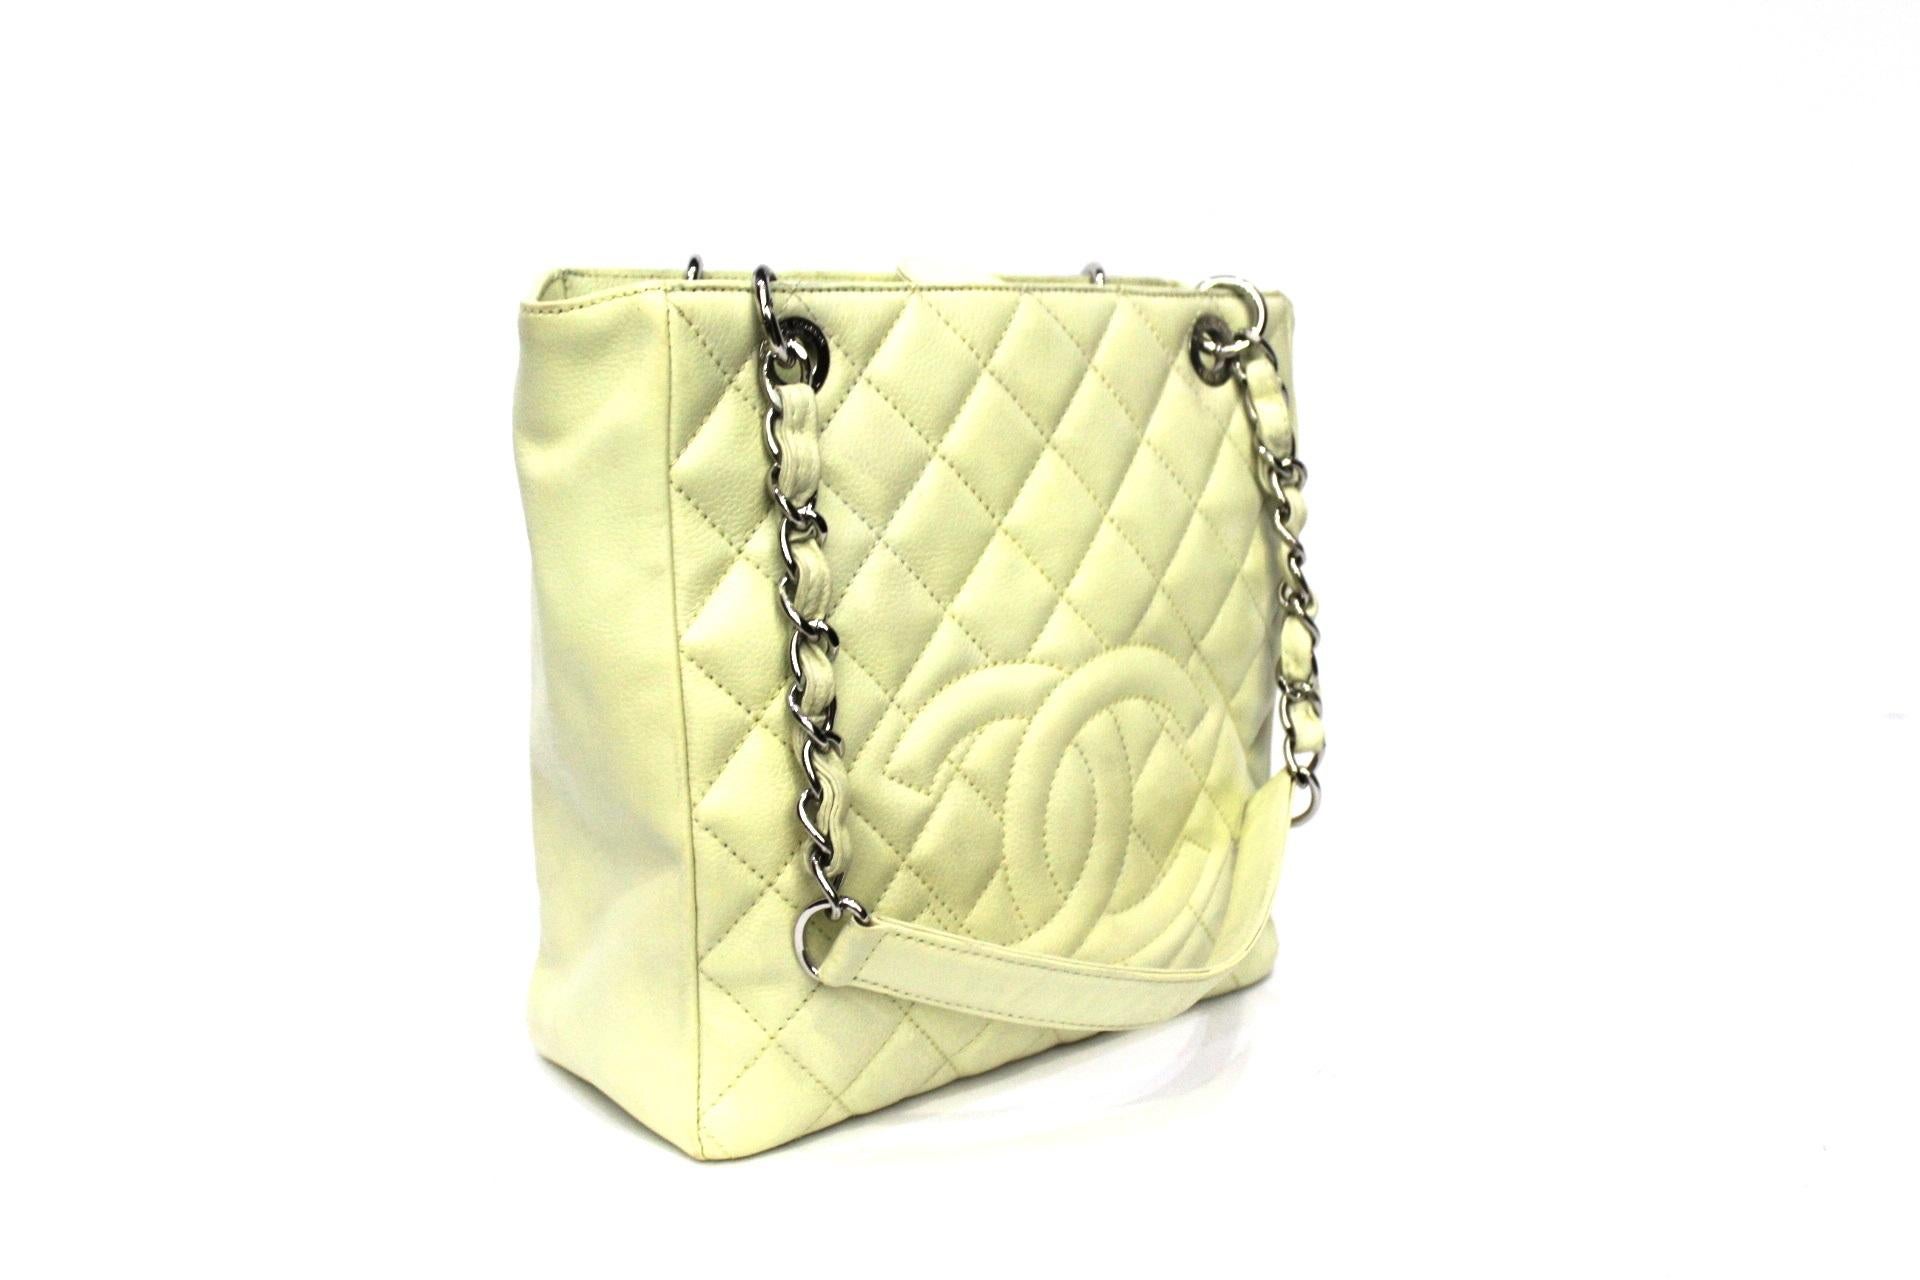 Chanel PST model shoulder bag made of cream leather with golden hardware. Magnetic button closure, internally large enough. The bag is in excellent condition. Year 2012.